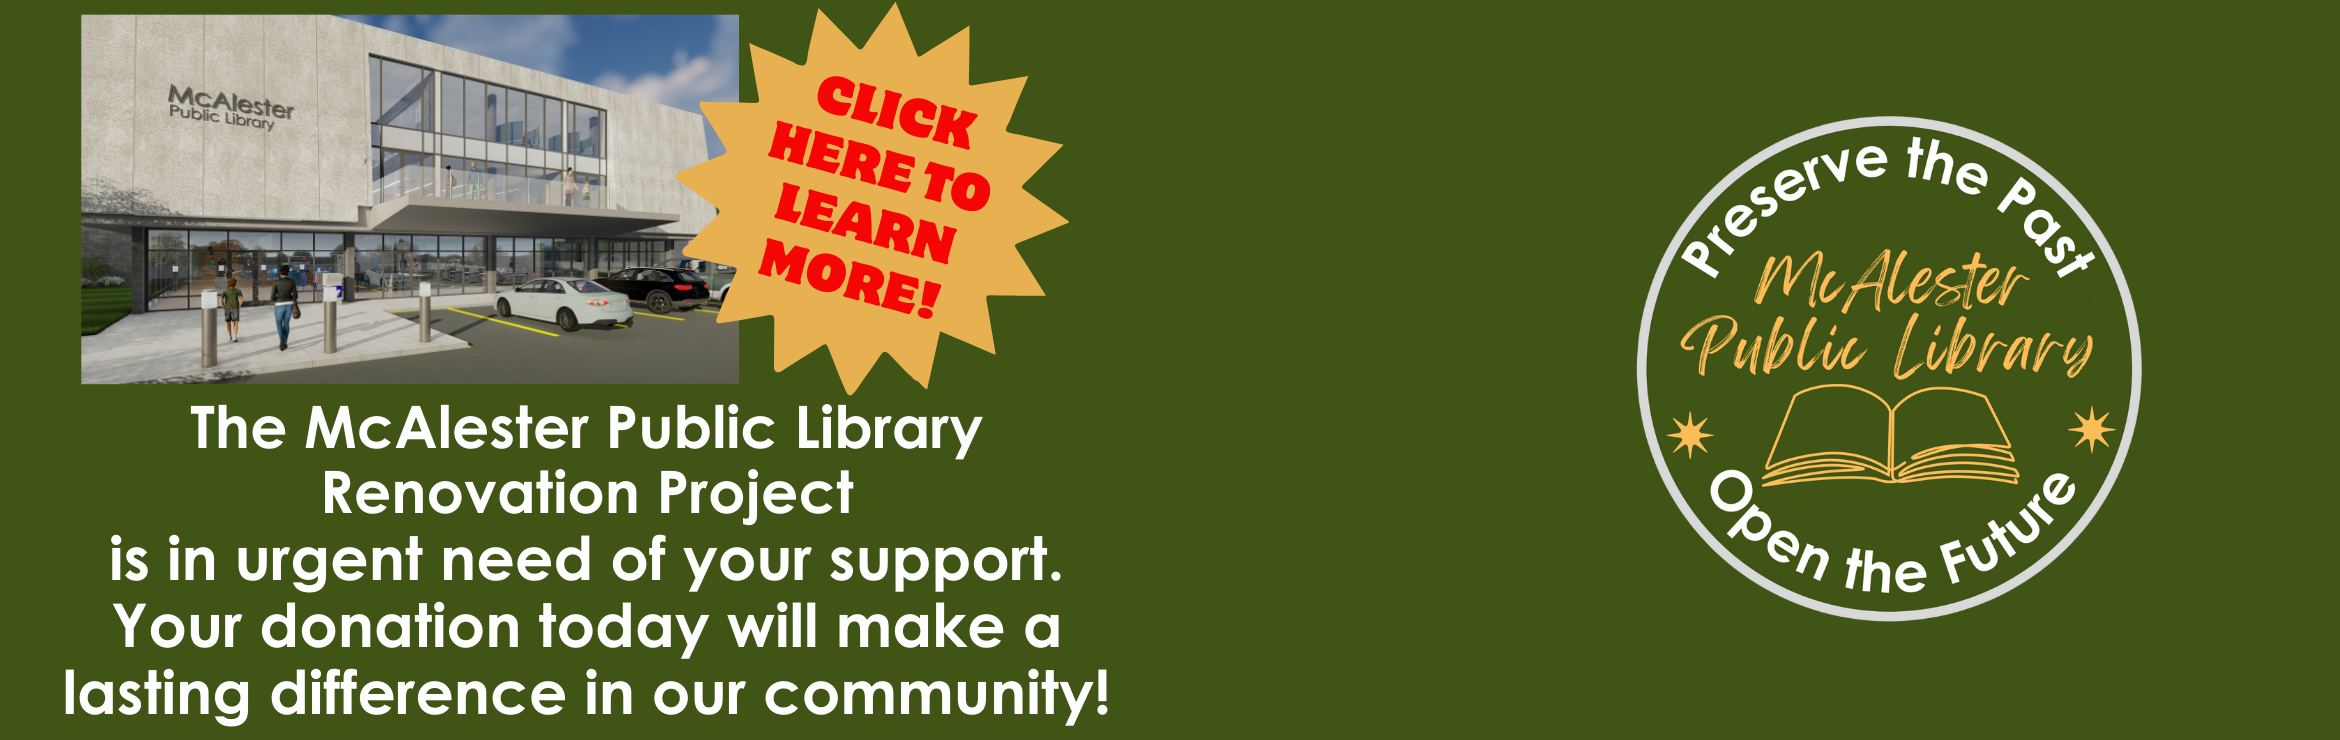 McAlester Public Library Renovation Campaign Needs You!